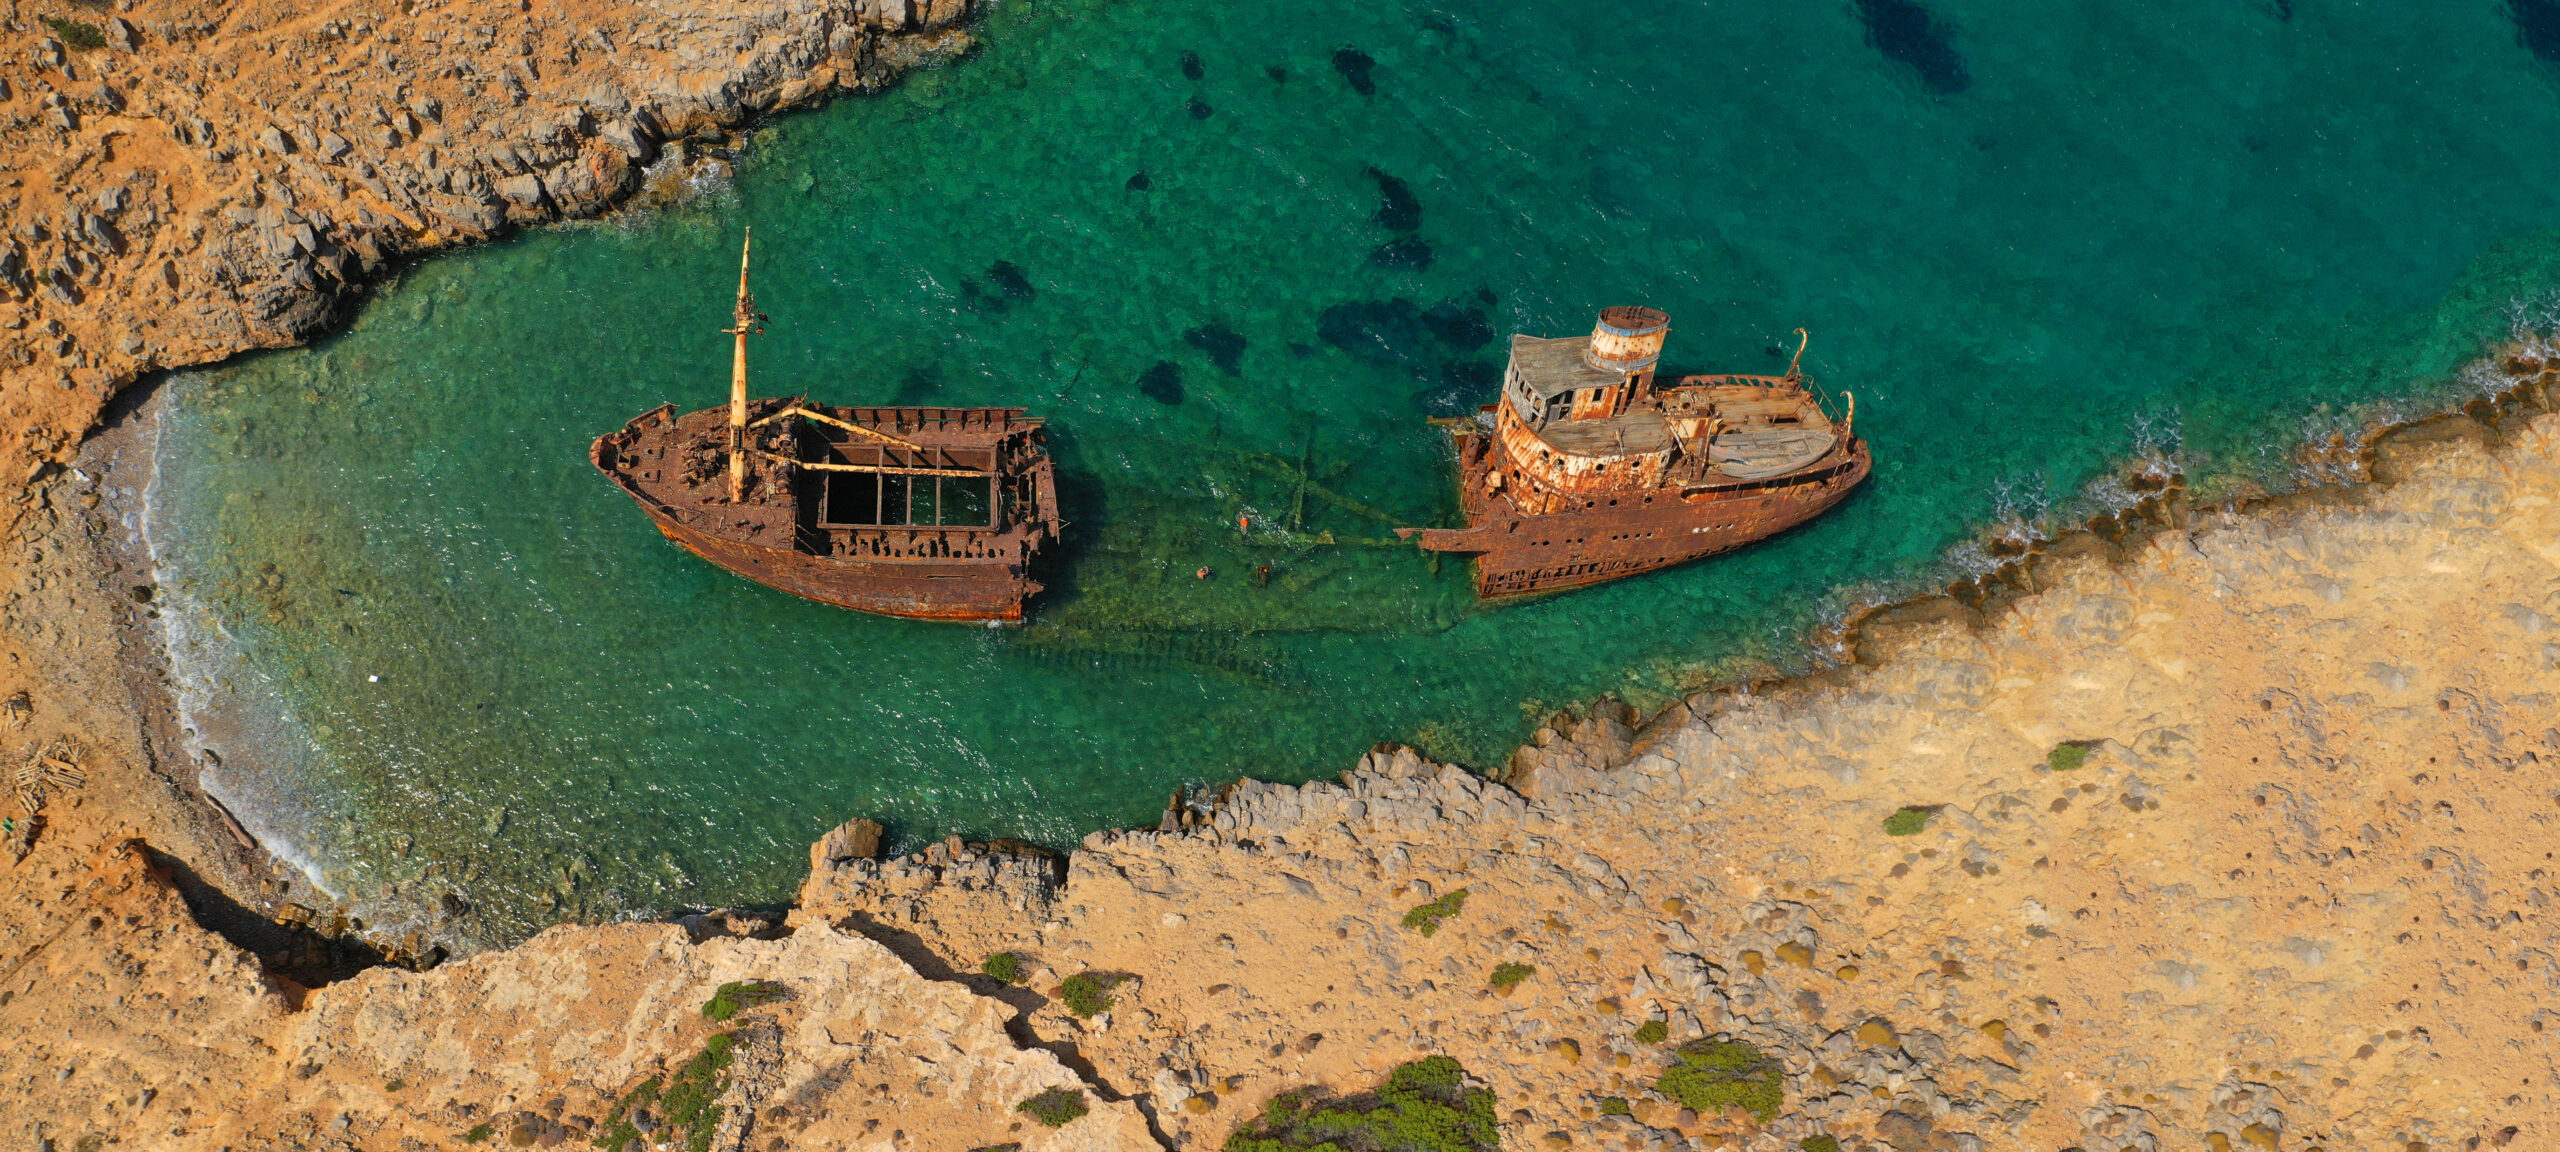 The Cycladic island with its own unknown shipwreck